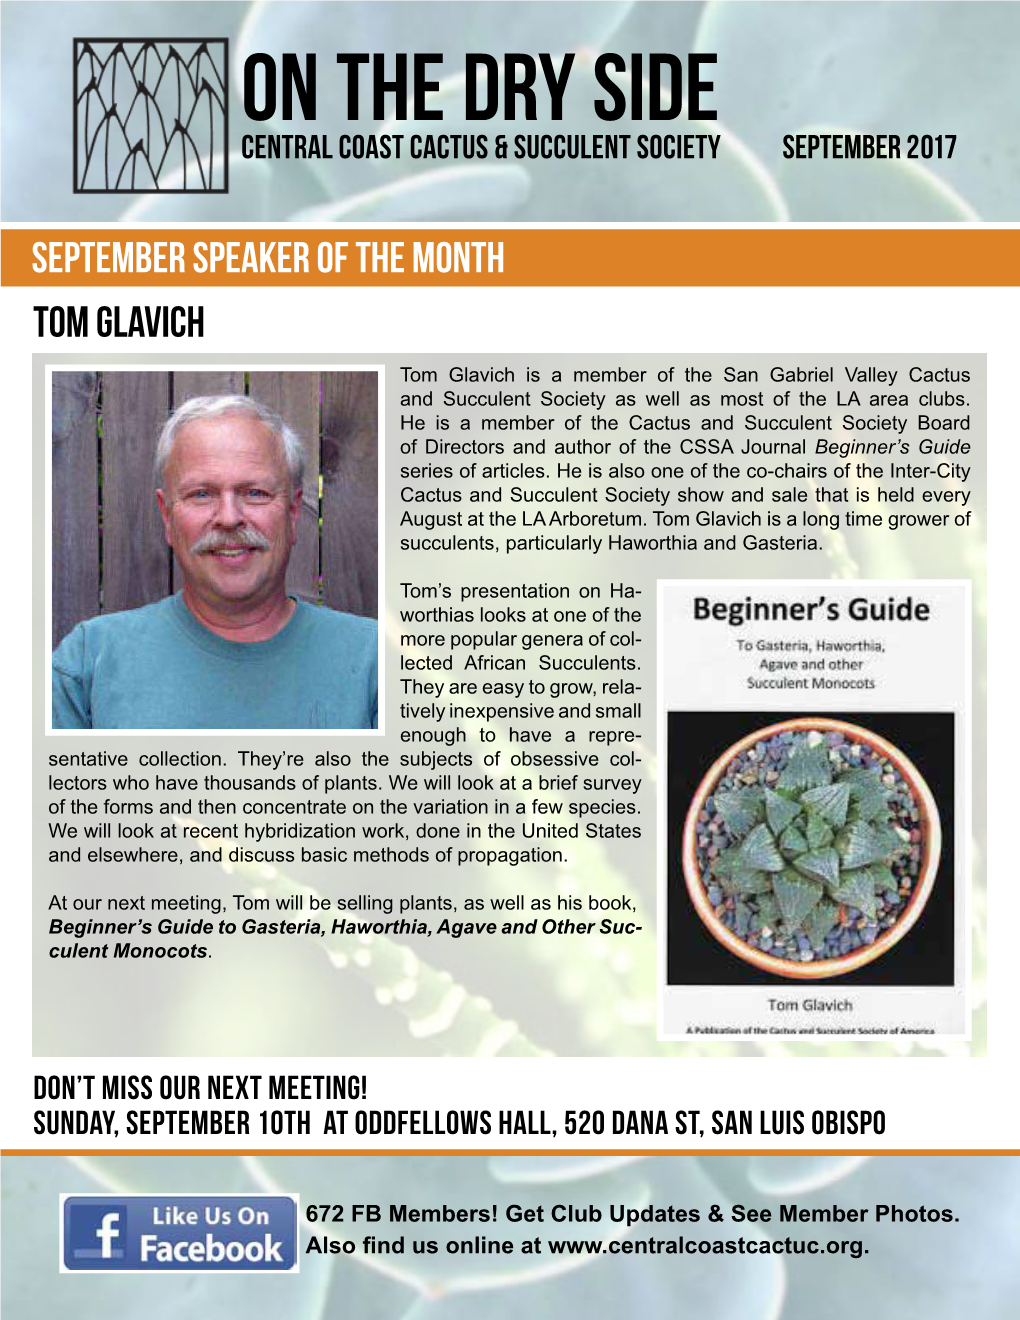 On the Dry Side Central Coast Cactus & Succulent Society September 2017